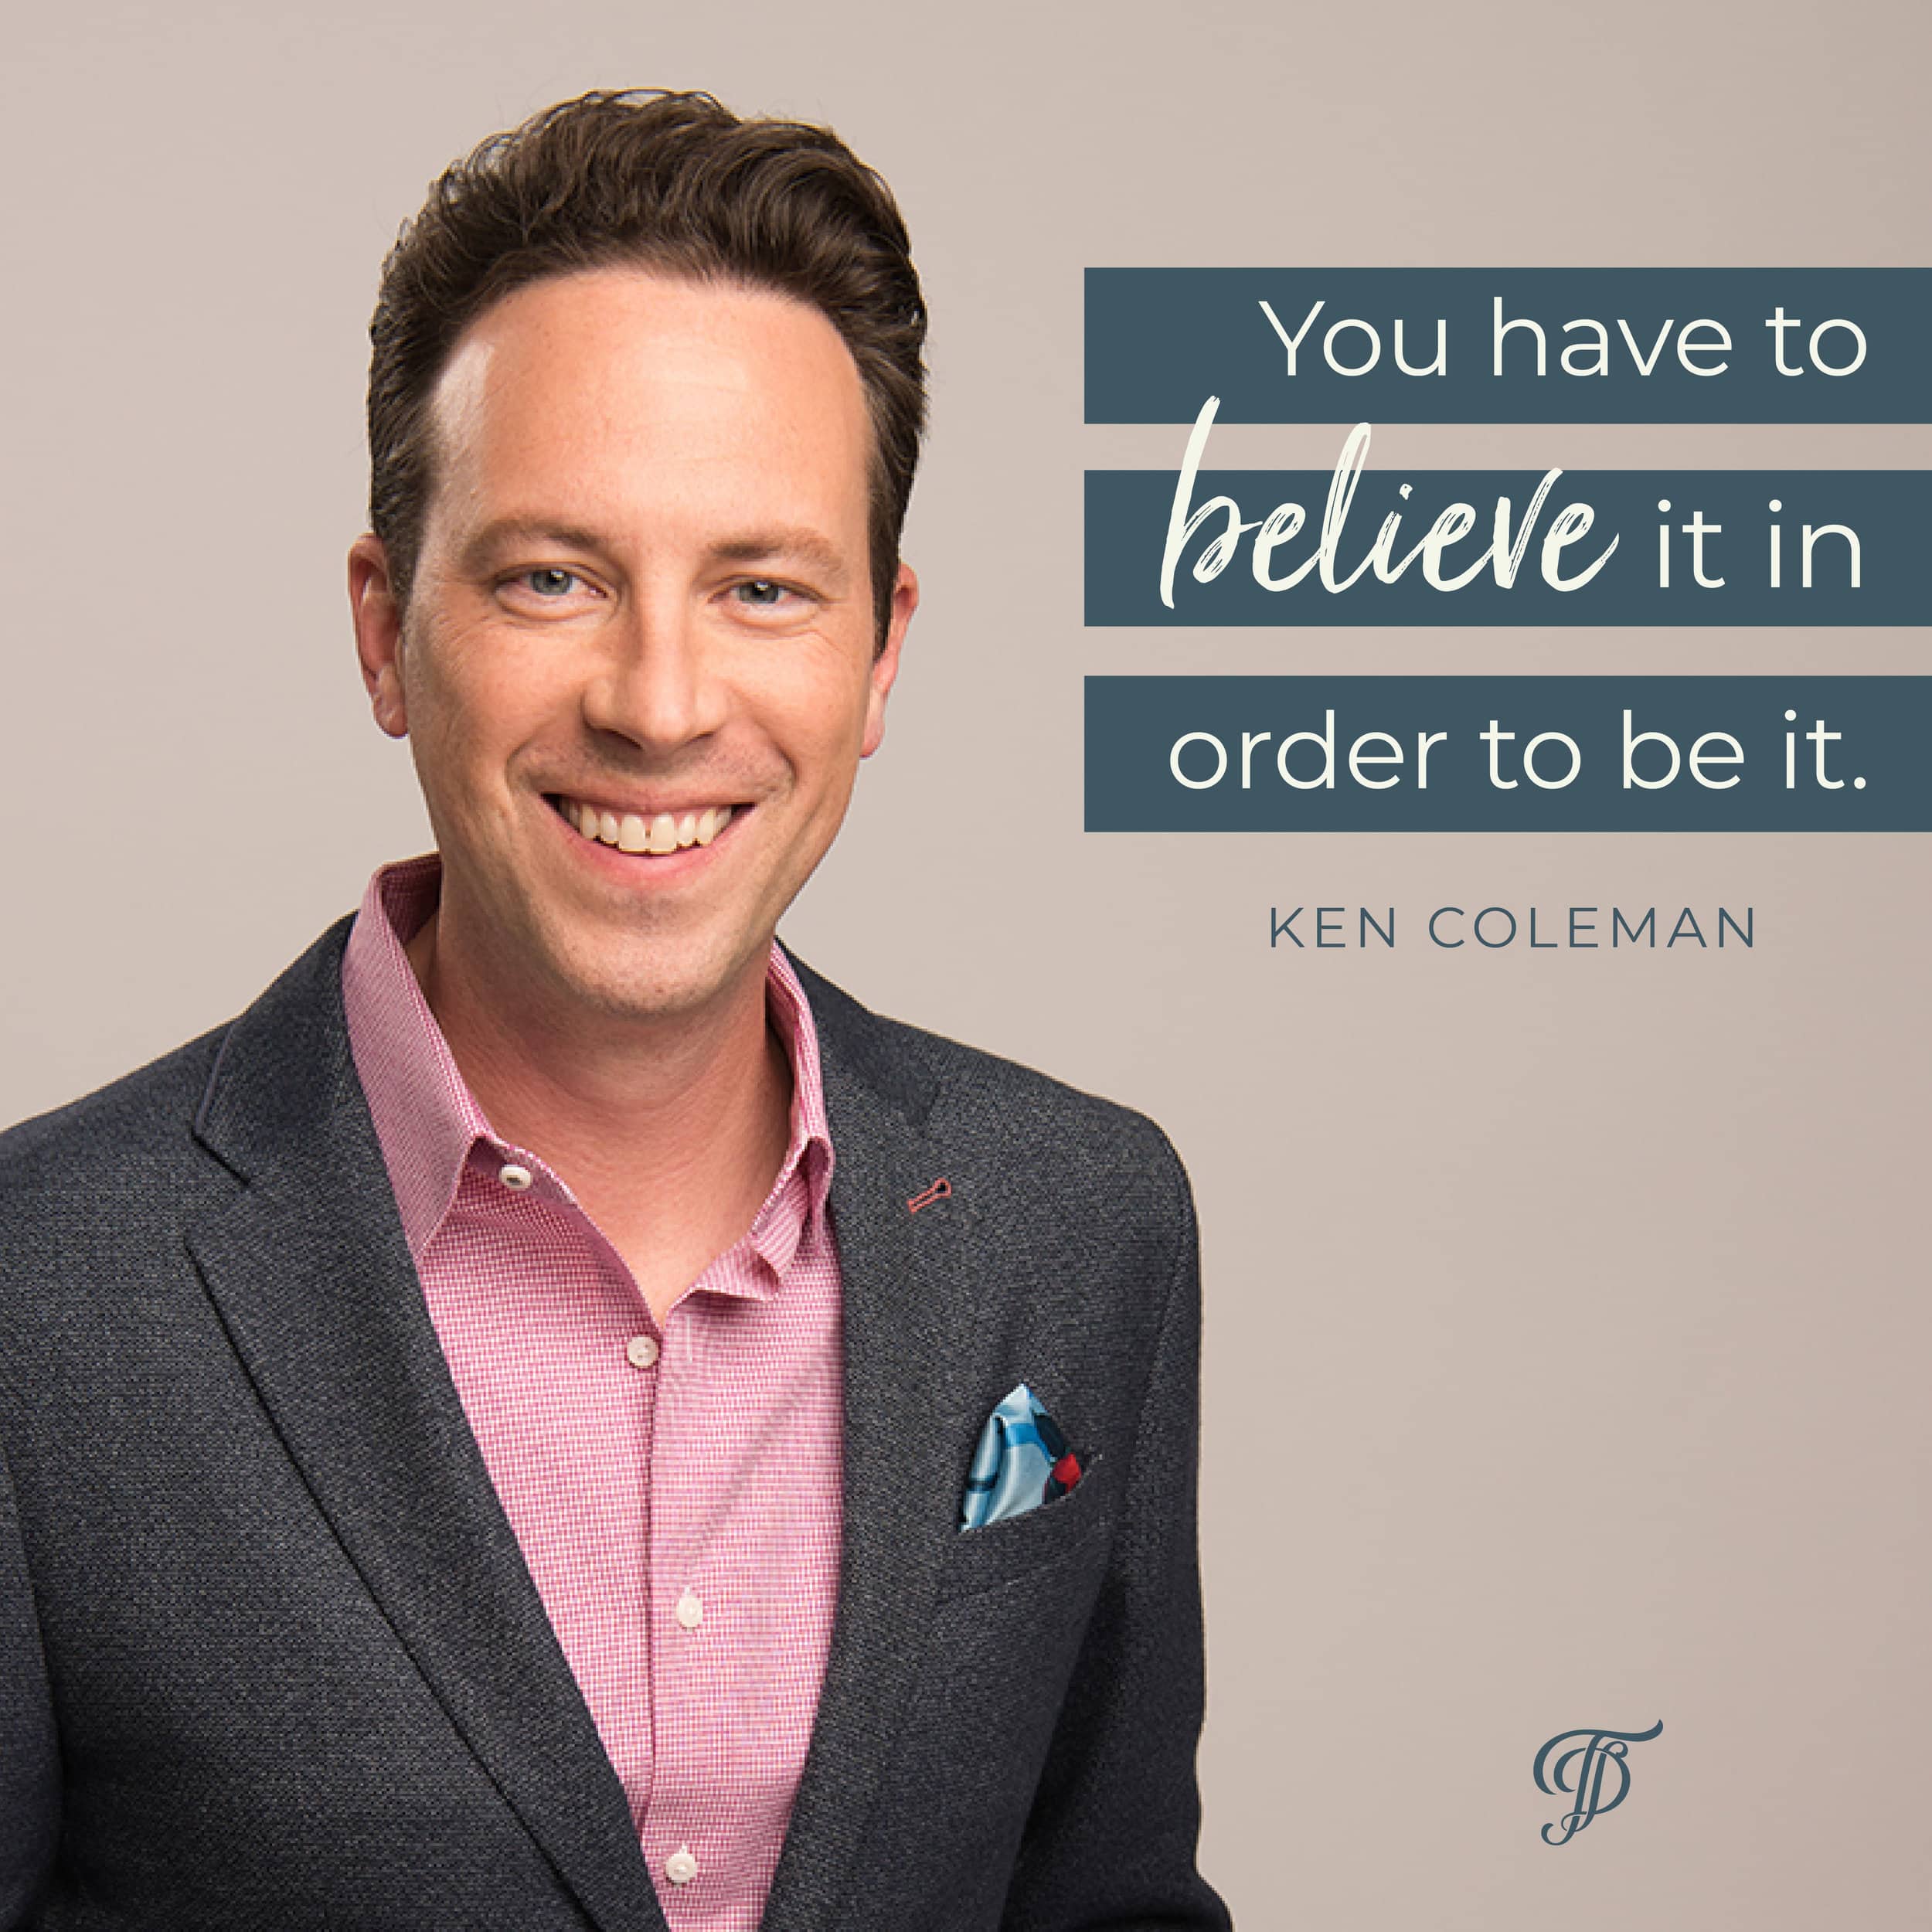 Ken Coleman podcast interview on The Intentional Advantage